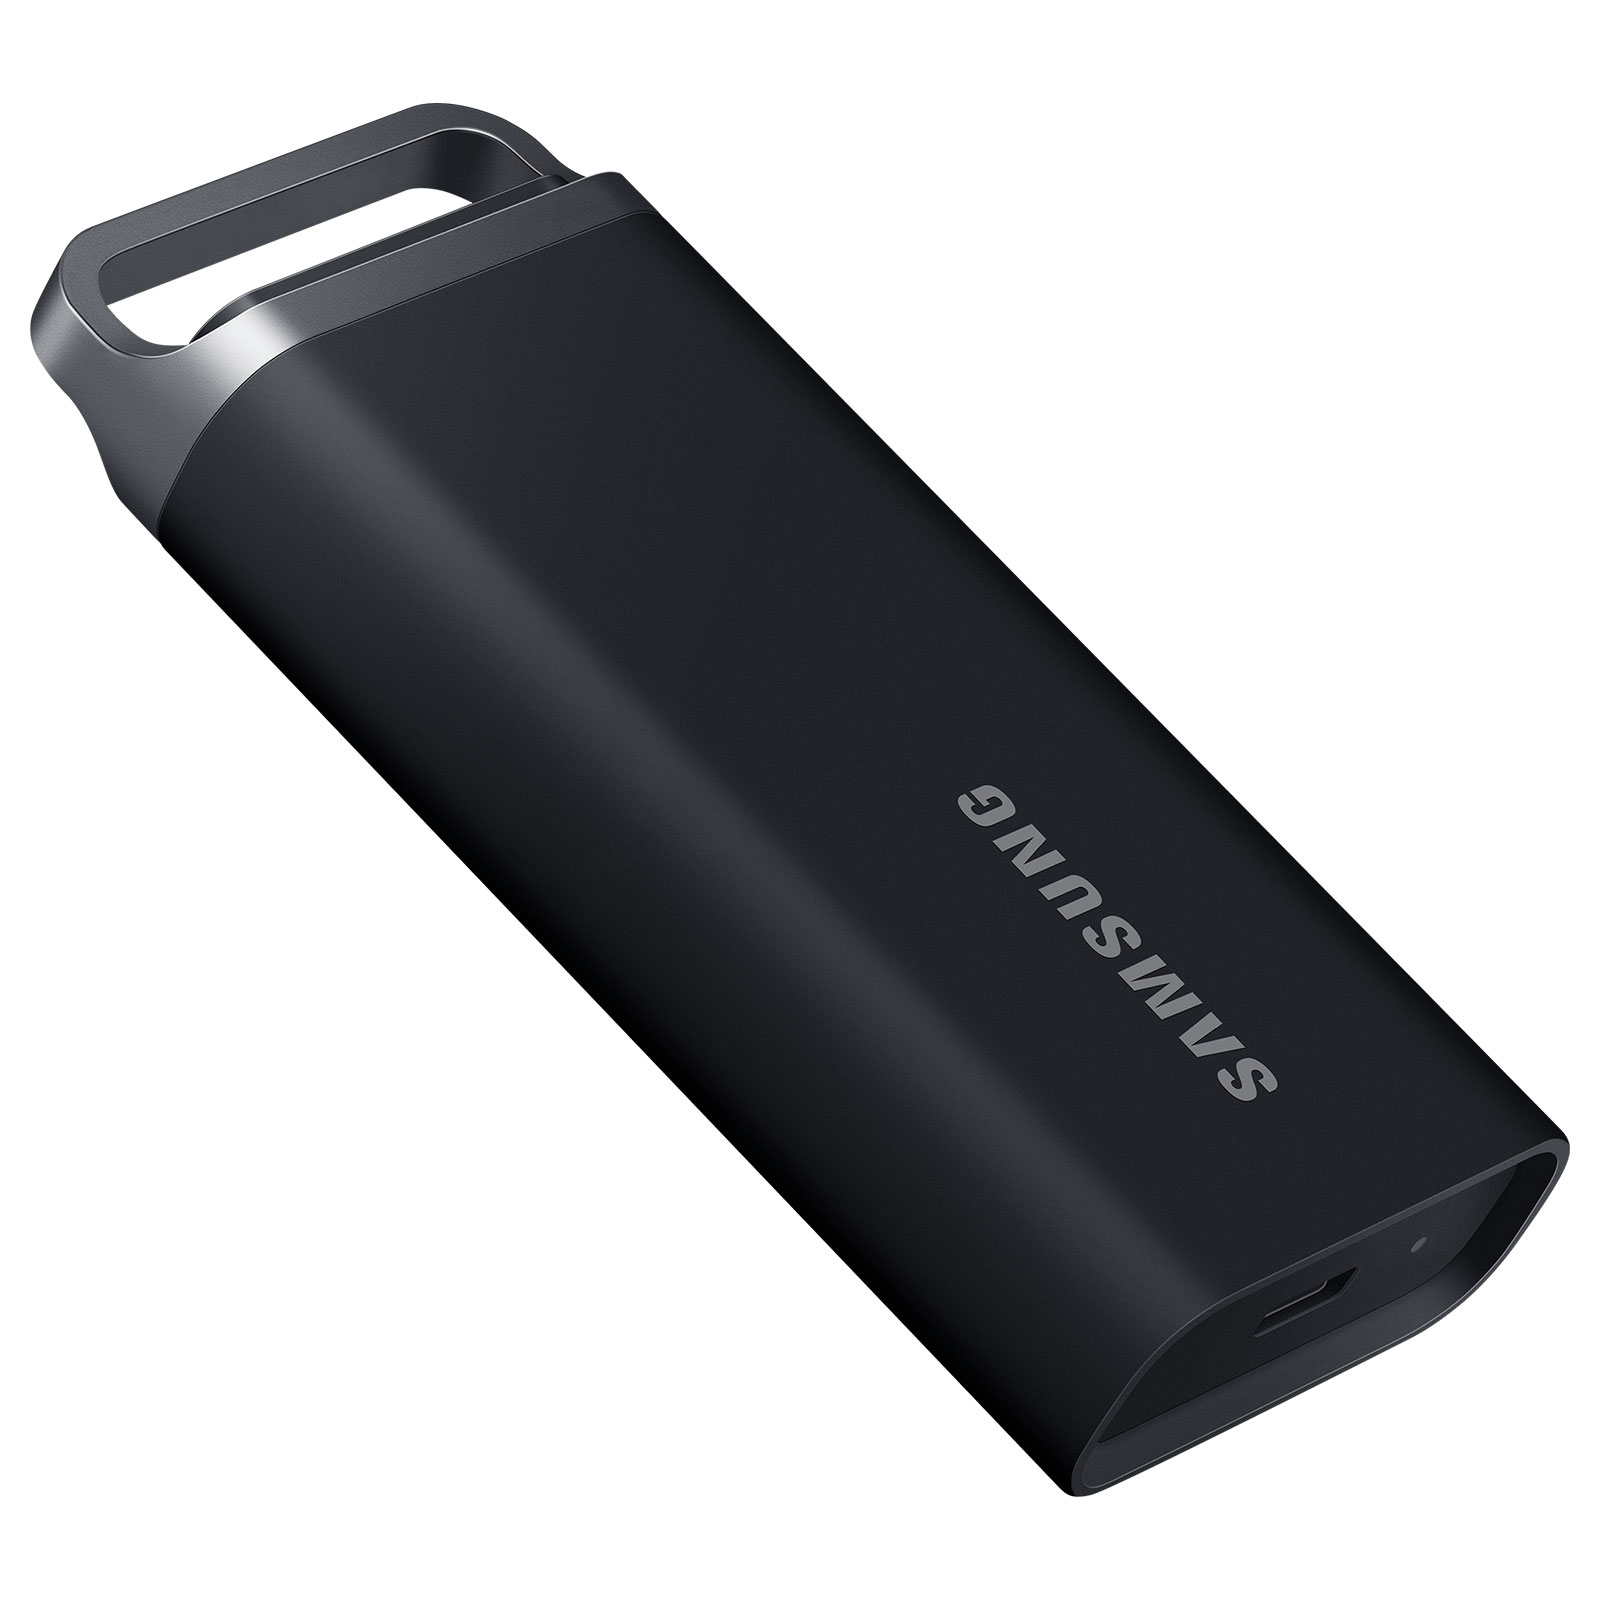 Samsung Portable SSD T5 EVO 4 To pas cher - HardWare.fr